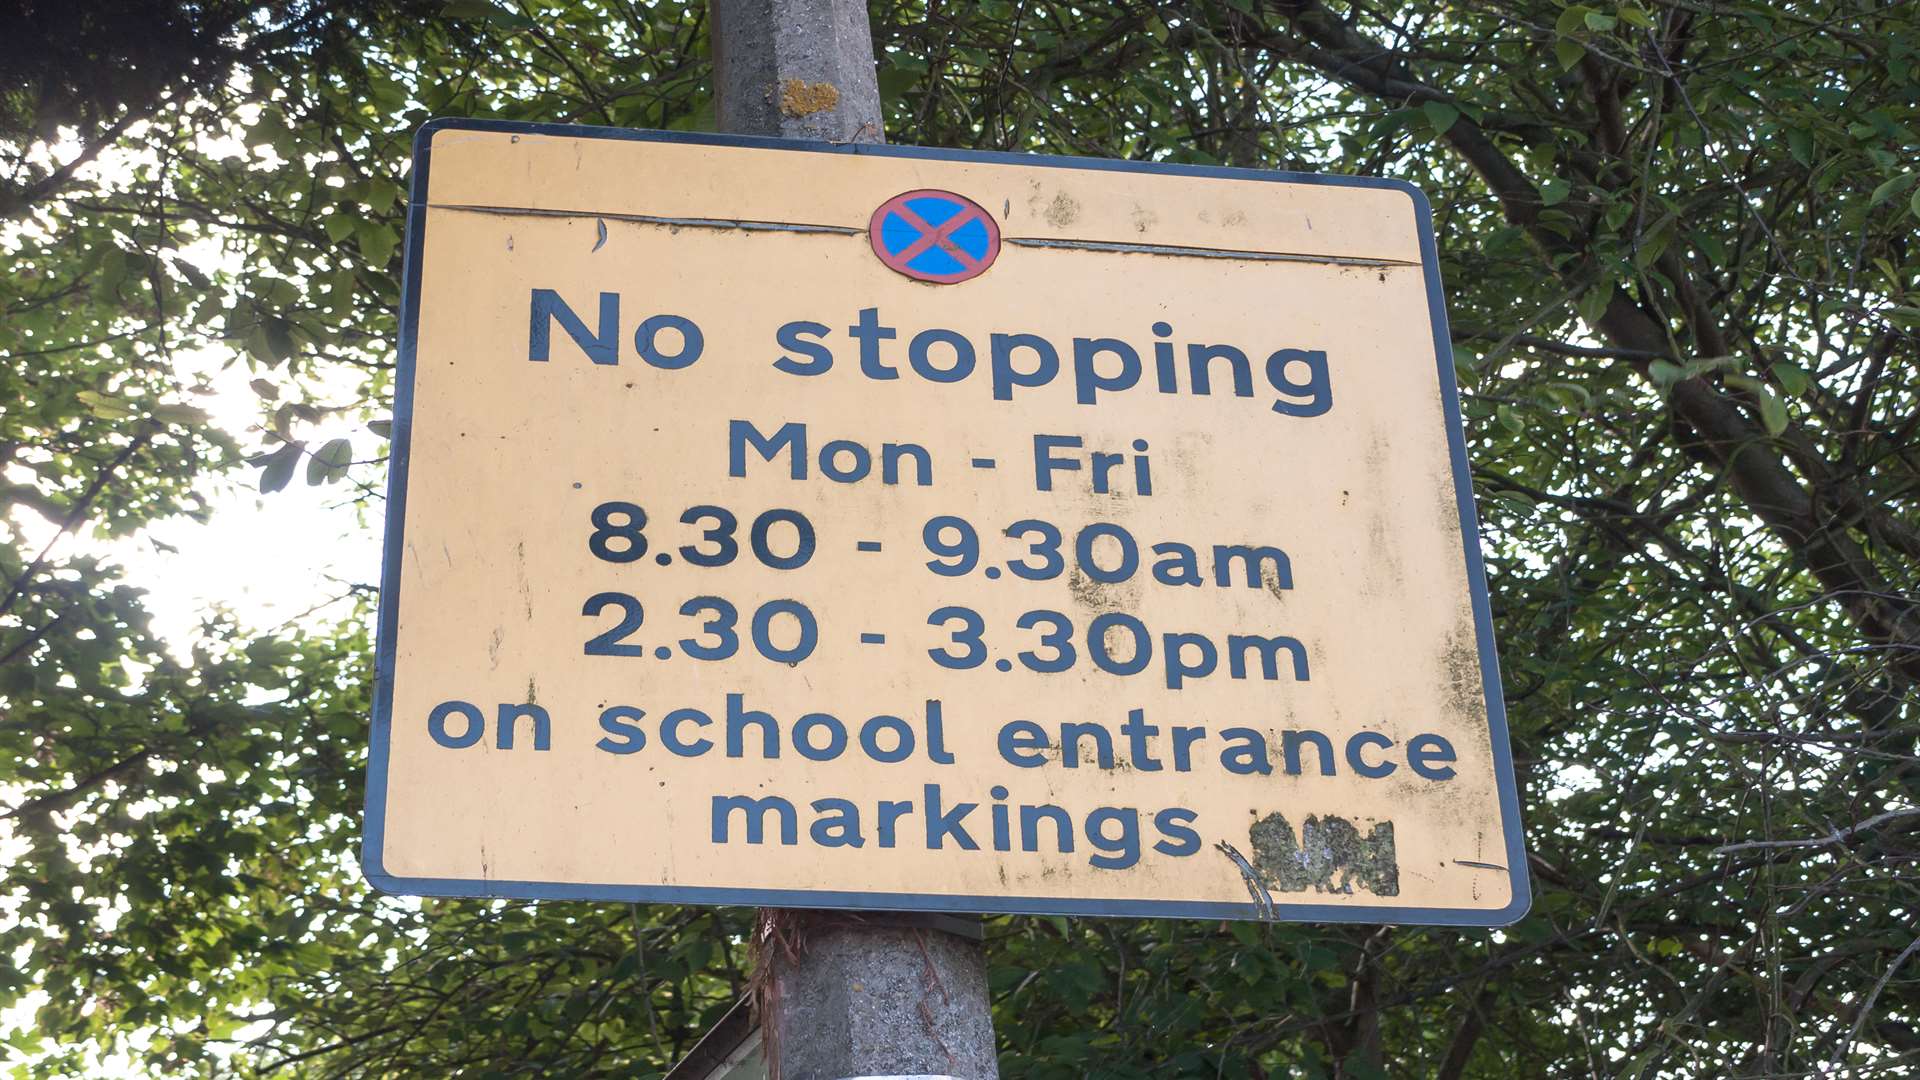 Parking restrictions are a problem for parents at many Kent schools